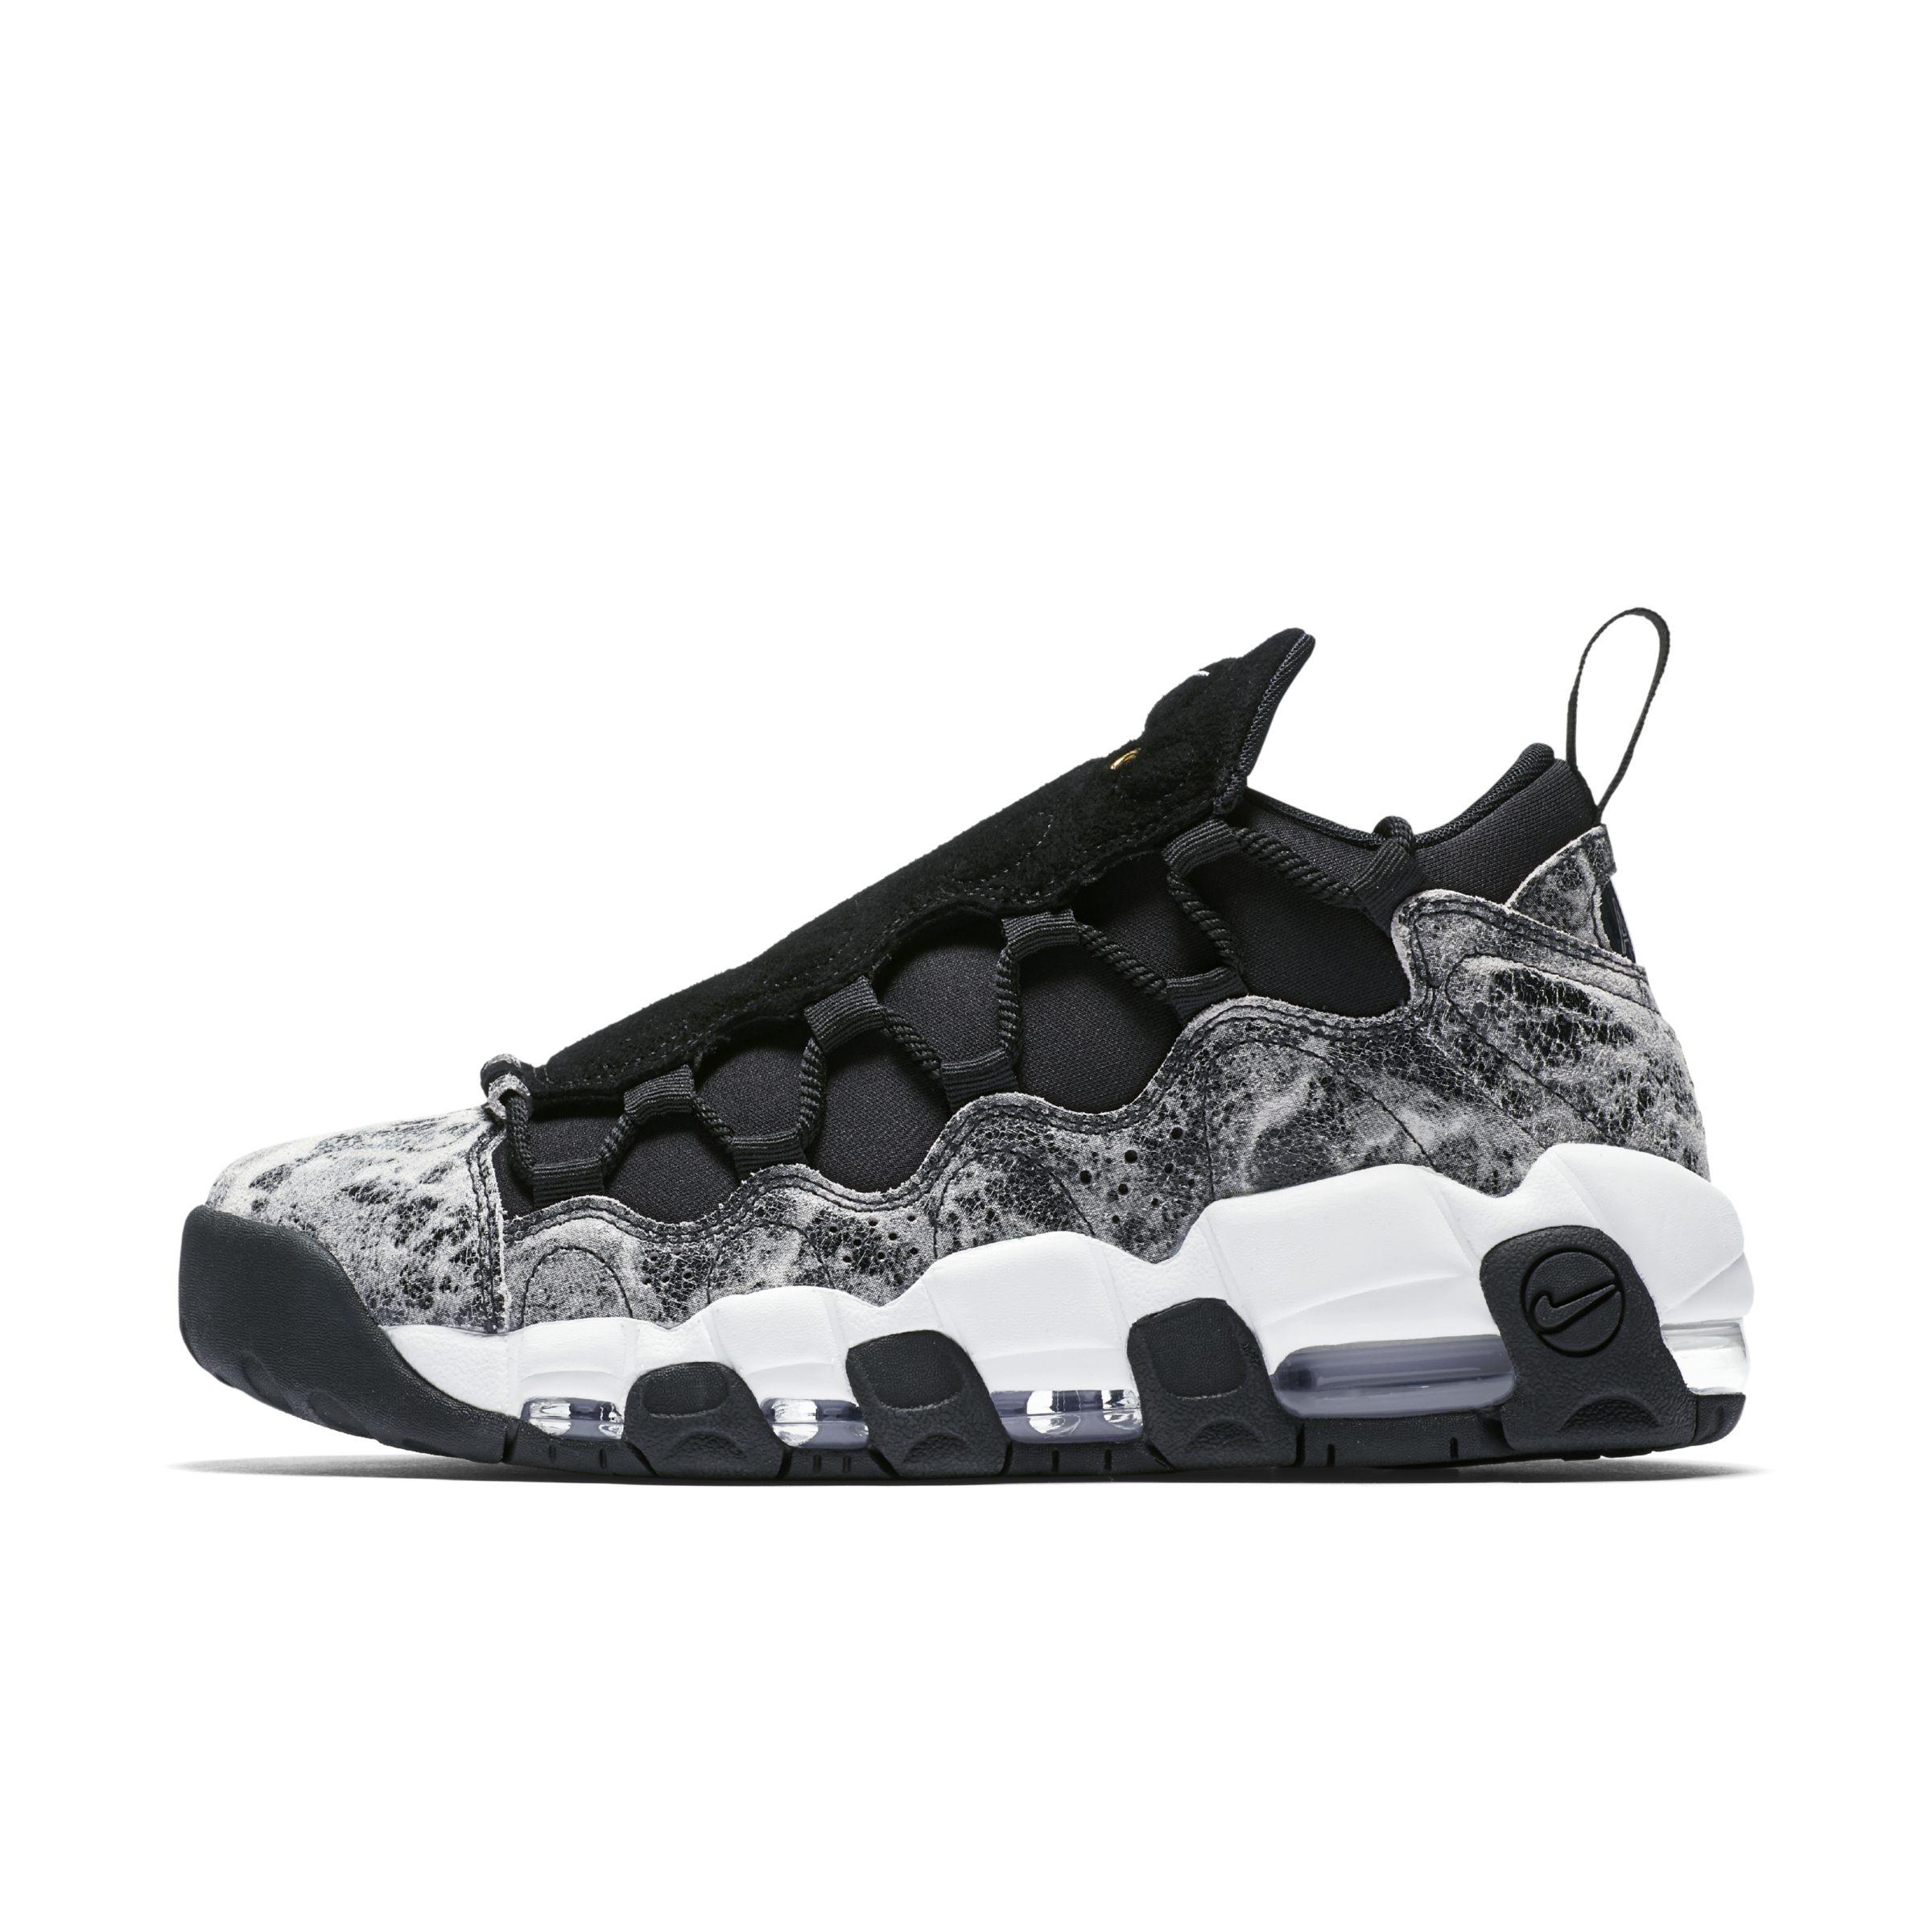 Nike Air More Money Lx Shoe in Black - Lyst